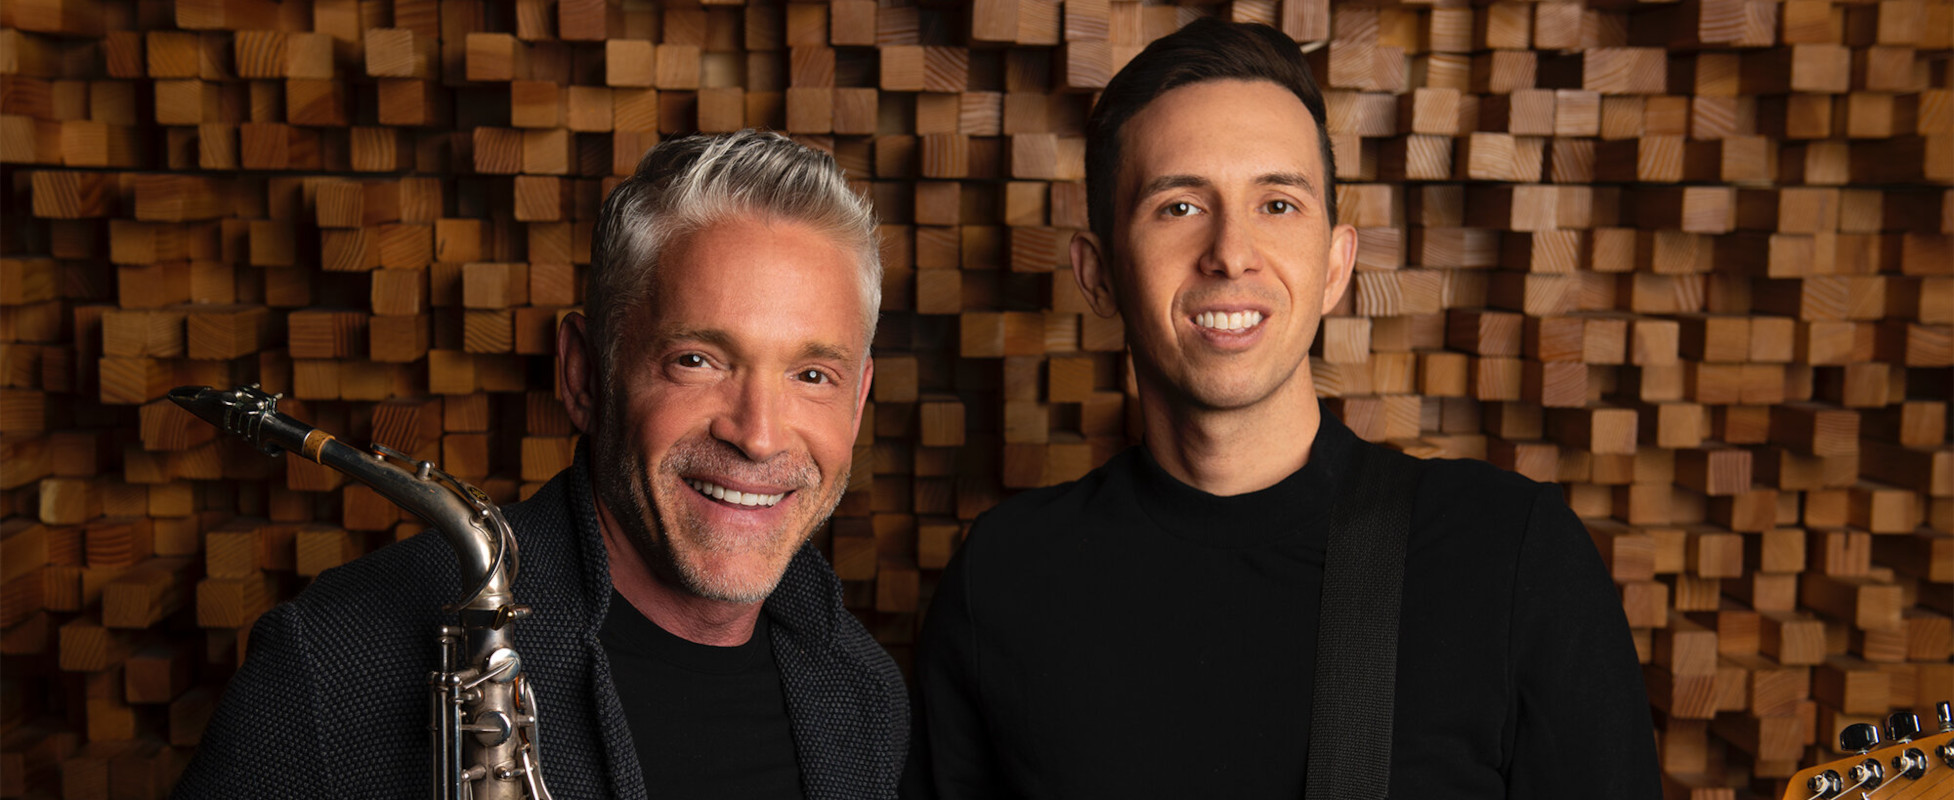 Dave Koz and Cory Wong Release Video for Groovy New Single “Getaway Car”